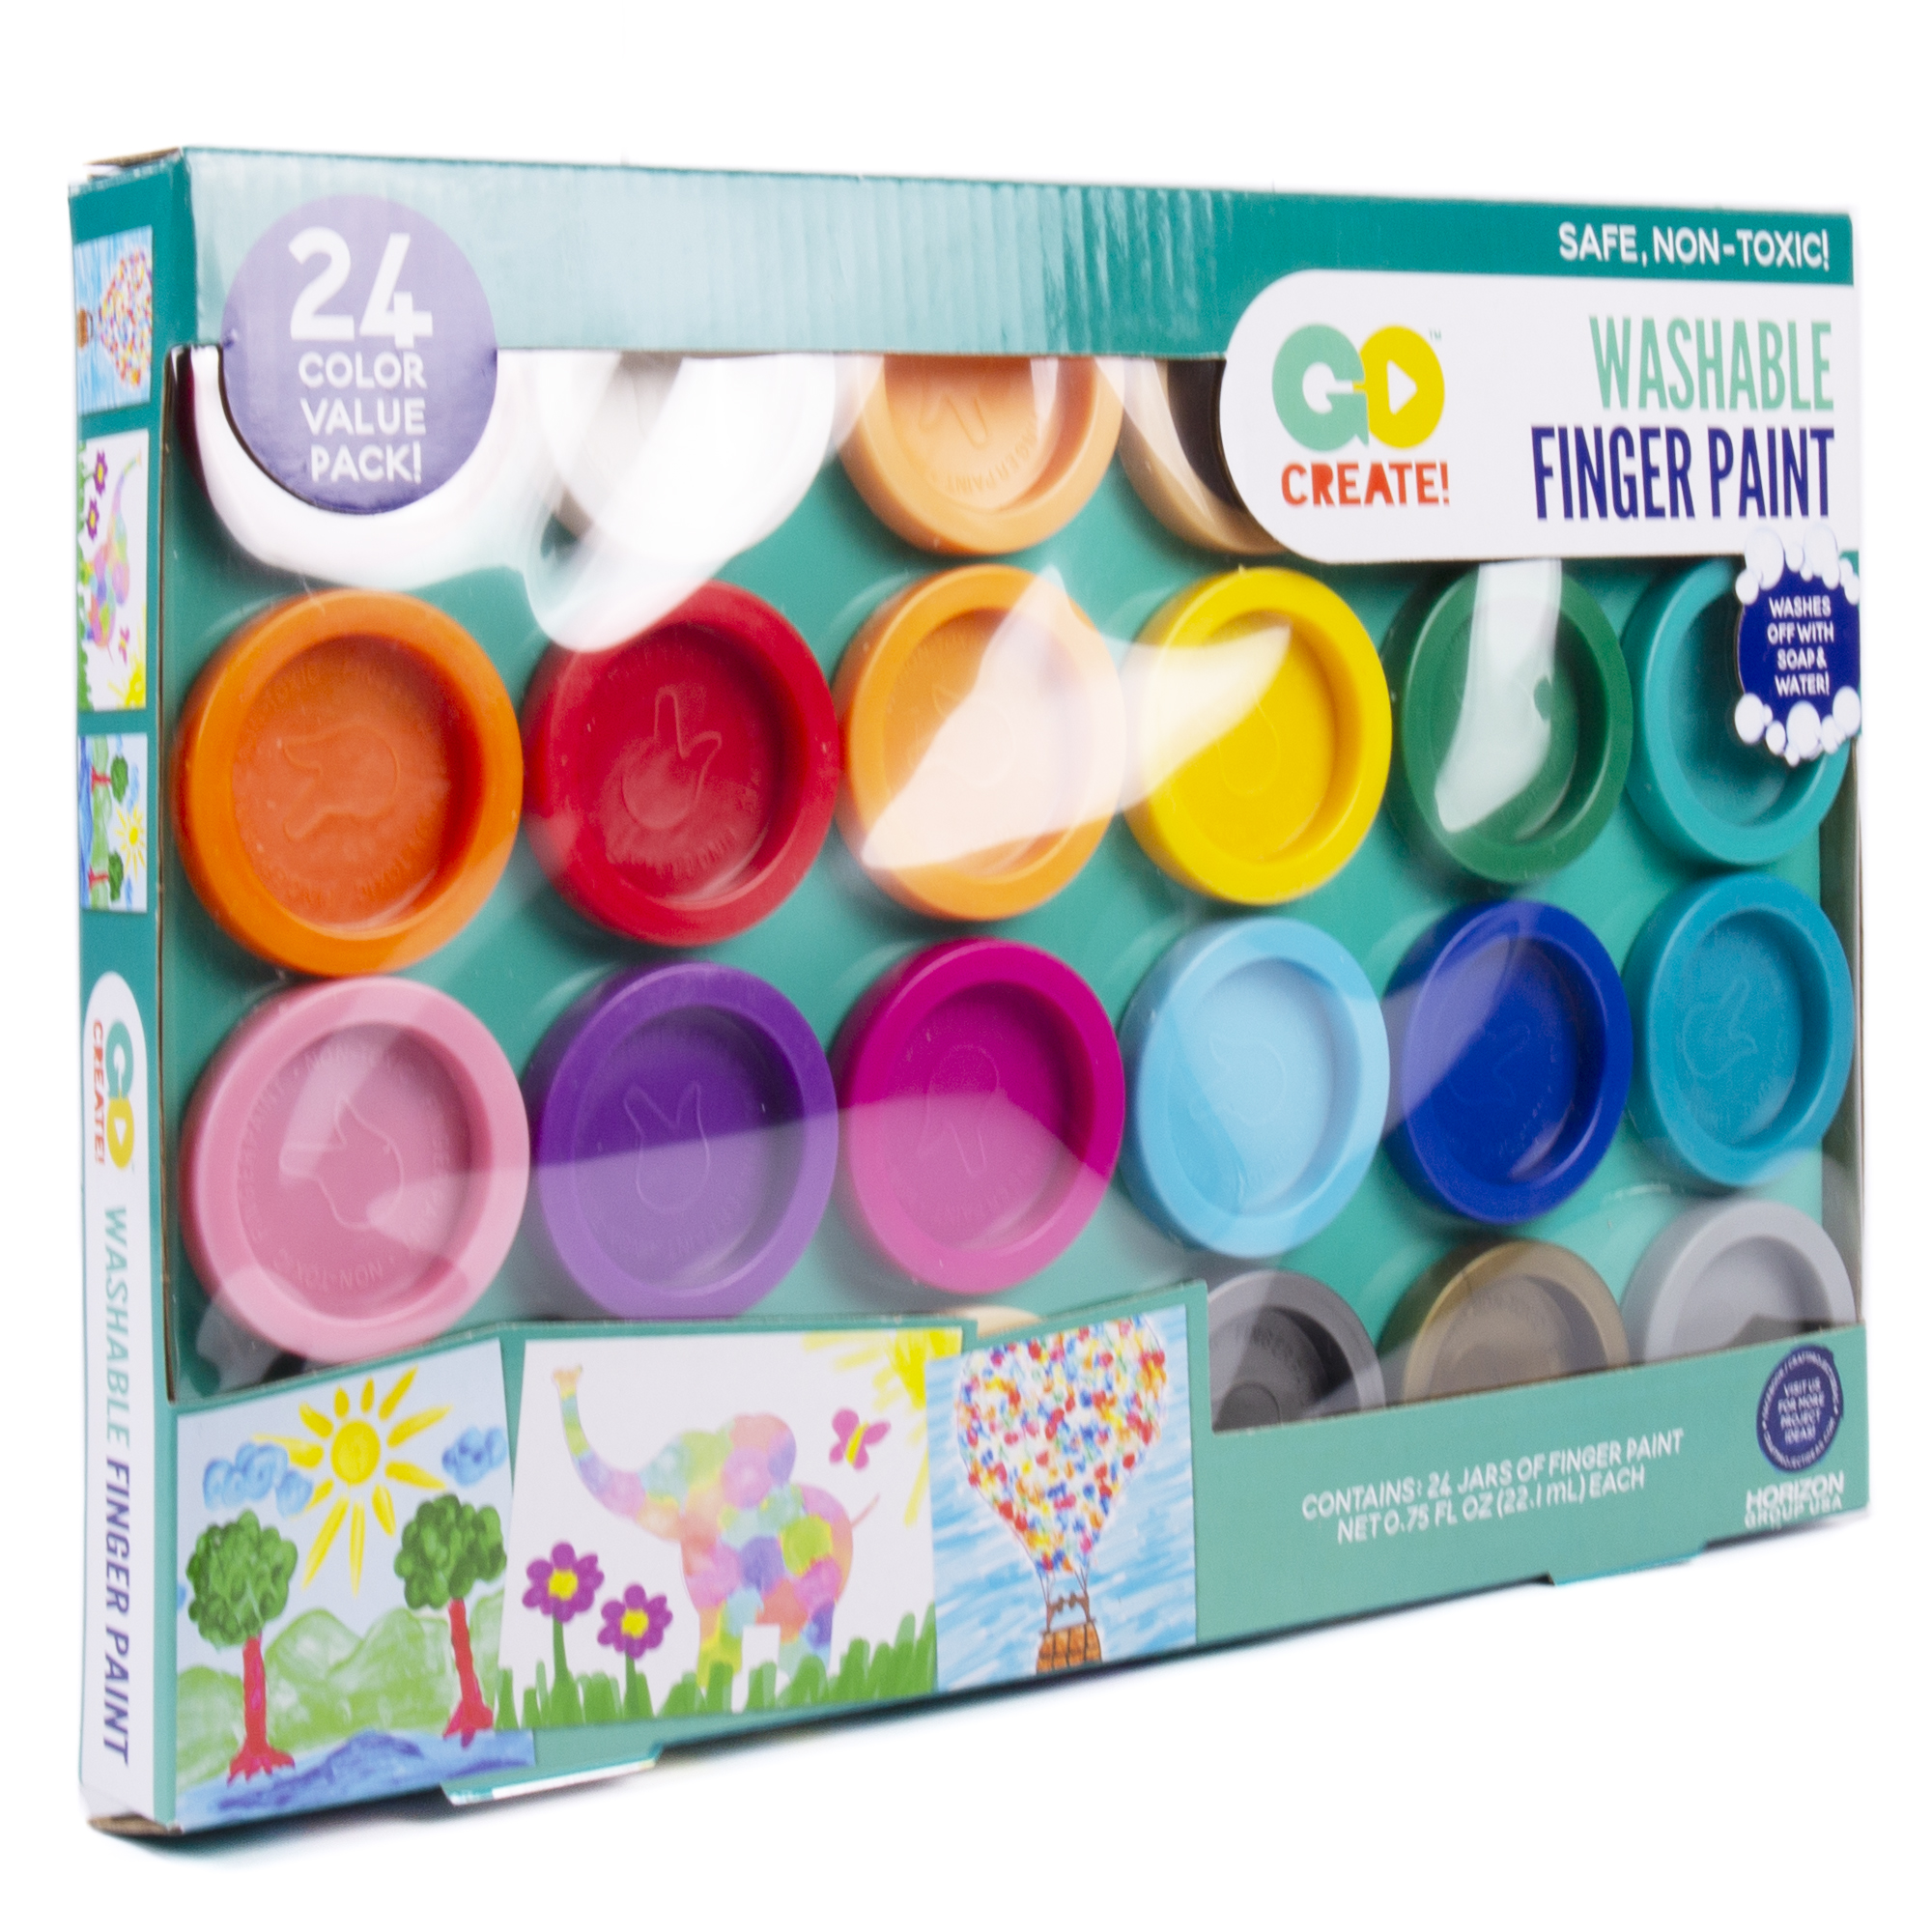 Go Create Washable Finger Paint Non-Toxic, 24 Count - image 2 of 8